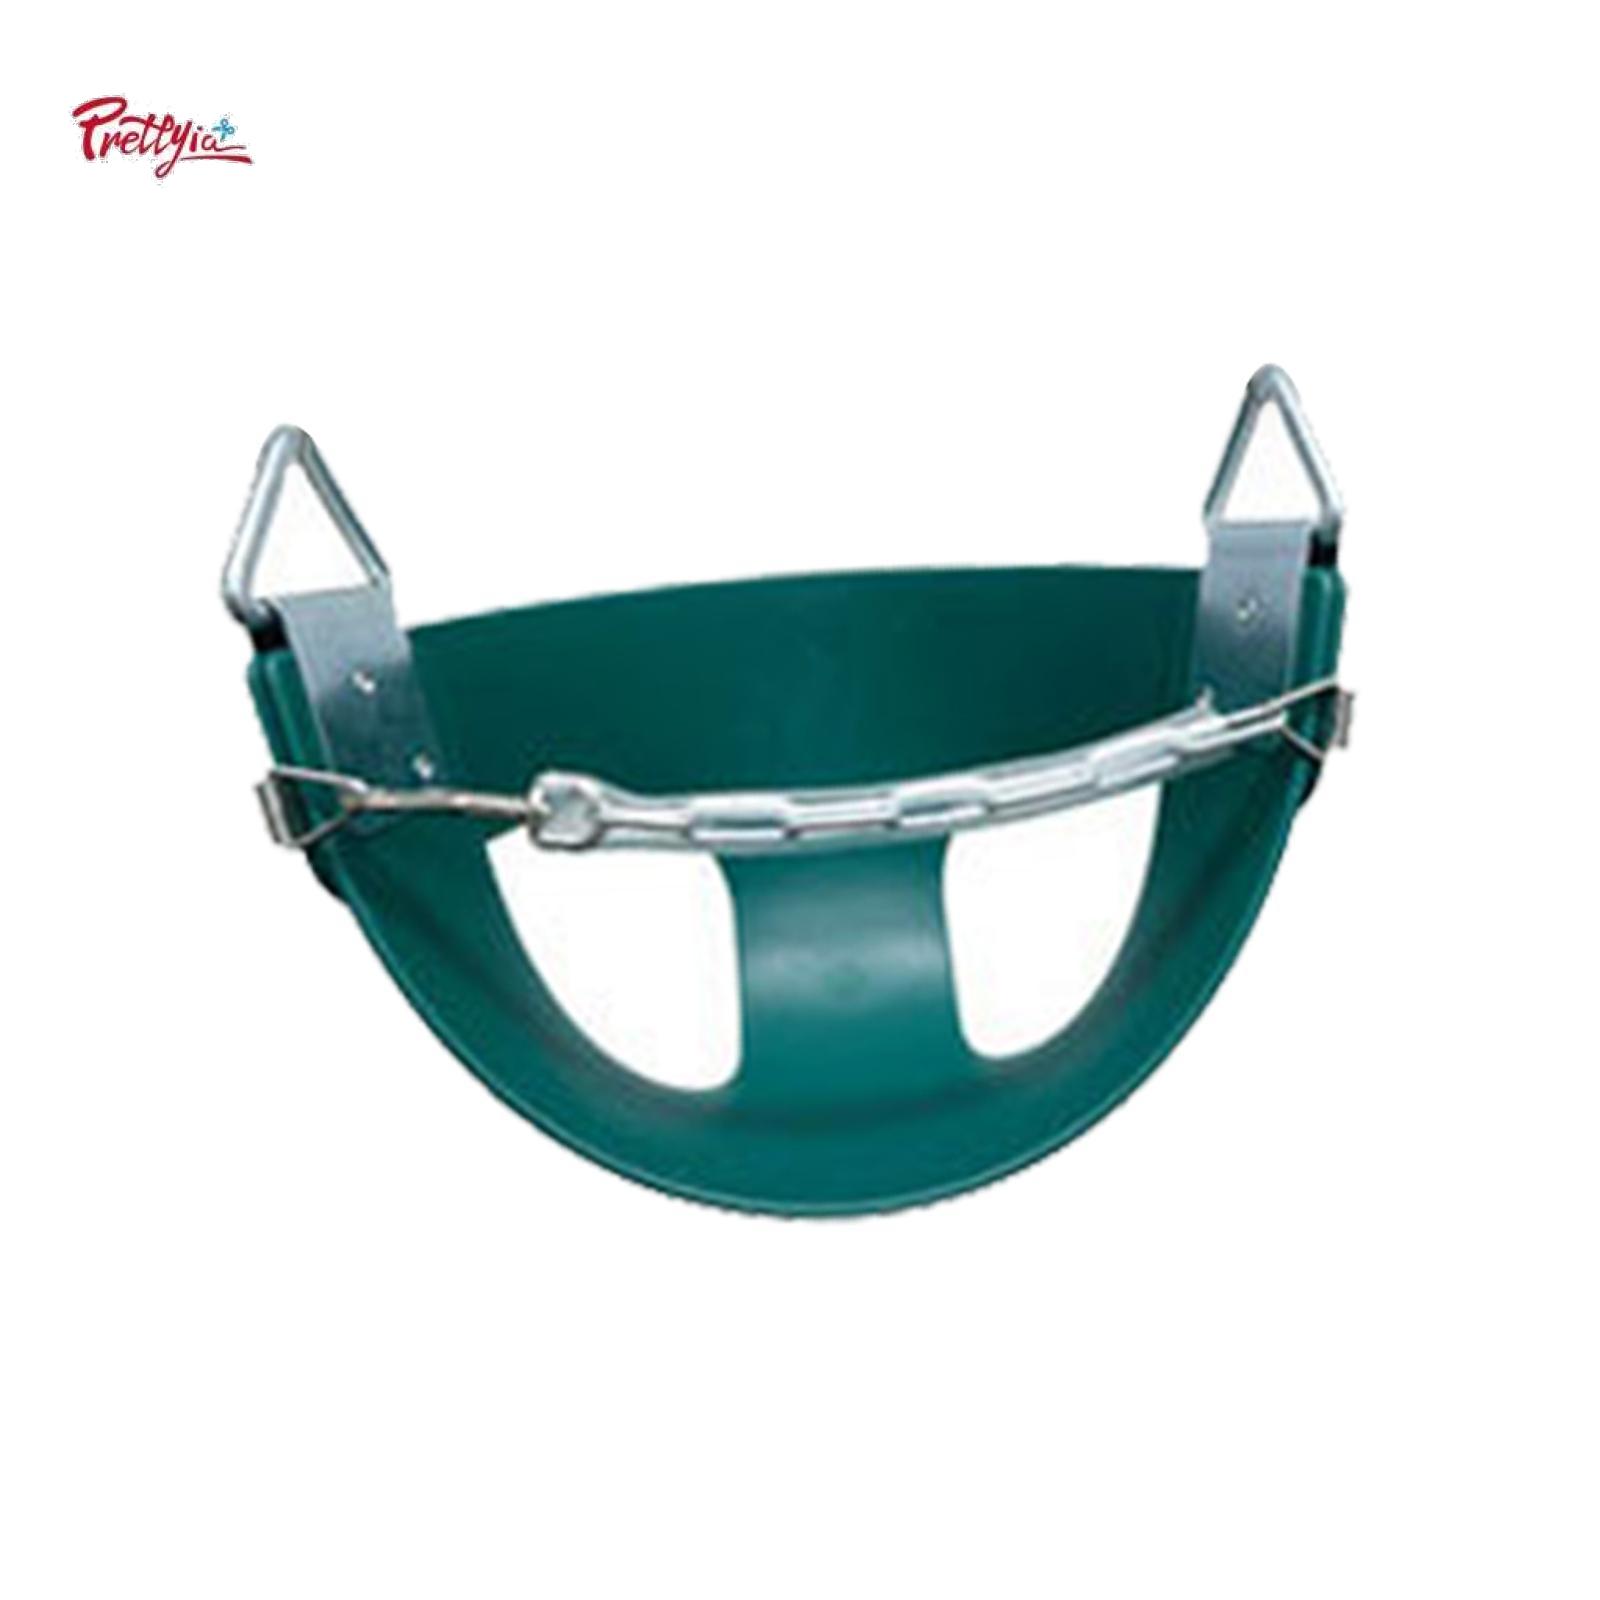 Prettyia Swing Seat Swing Sets Easy Install High Back Bucket for Hiking